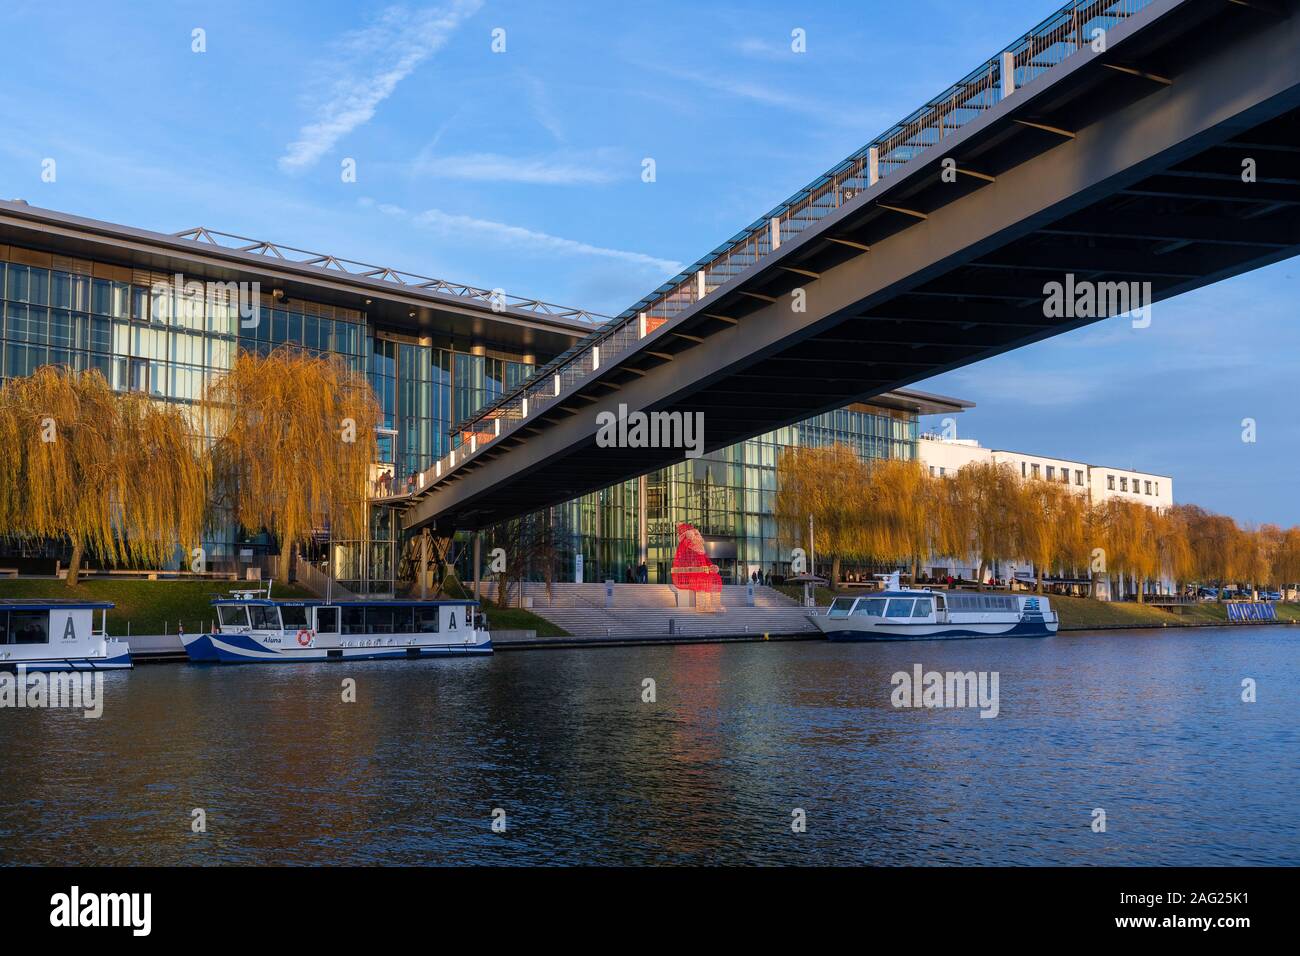 Autostadt in Wolfsburg is attracting visitors to Winter Wonder Land even the weather is not very winter -like. Stock Photo